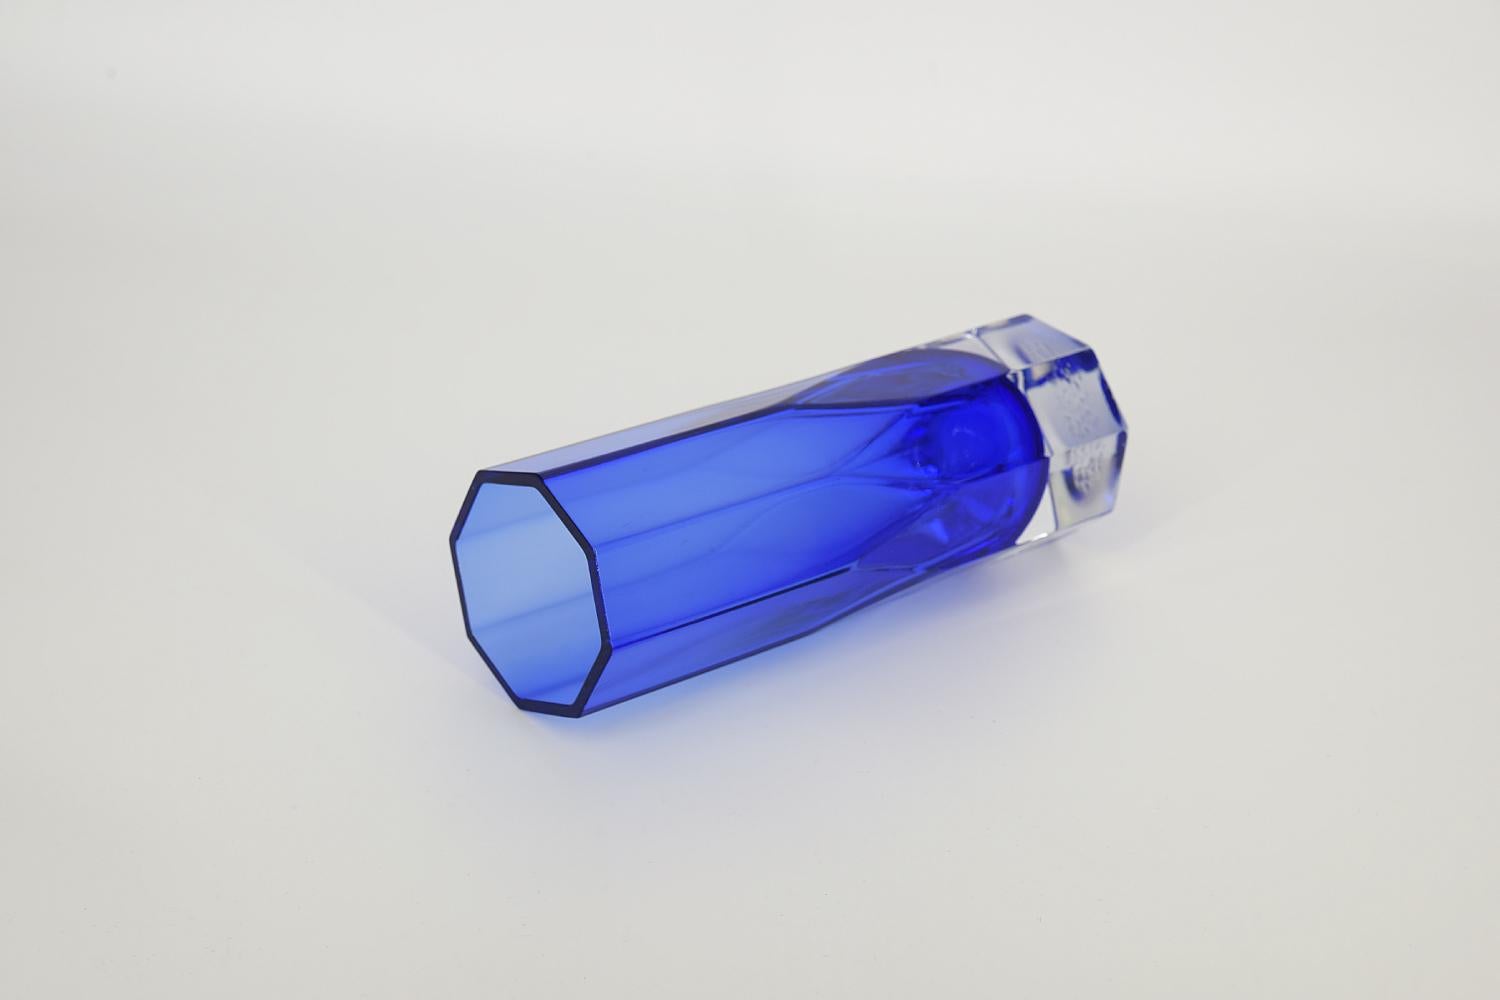 This tall, glass vase was designed by Gunnar Ander for the Swedish manufacturer Lindshammars Glasbruk during the 1950s. The vase is made of high quality thick cobalt glass.

Gunnar Ander (1908-1976) was a Swedish designer and architect. His design